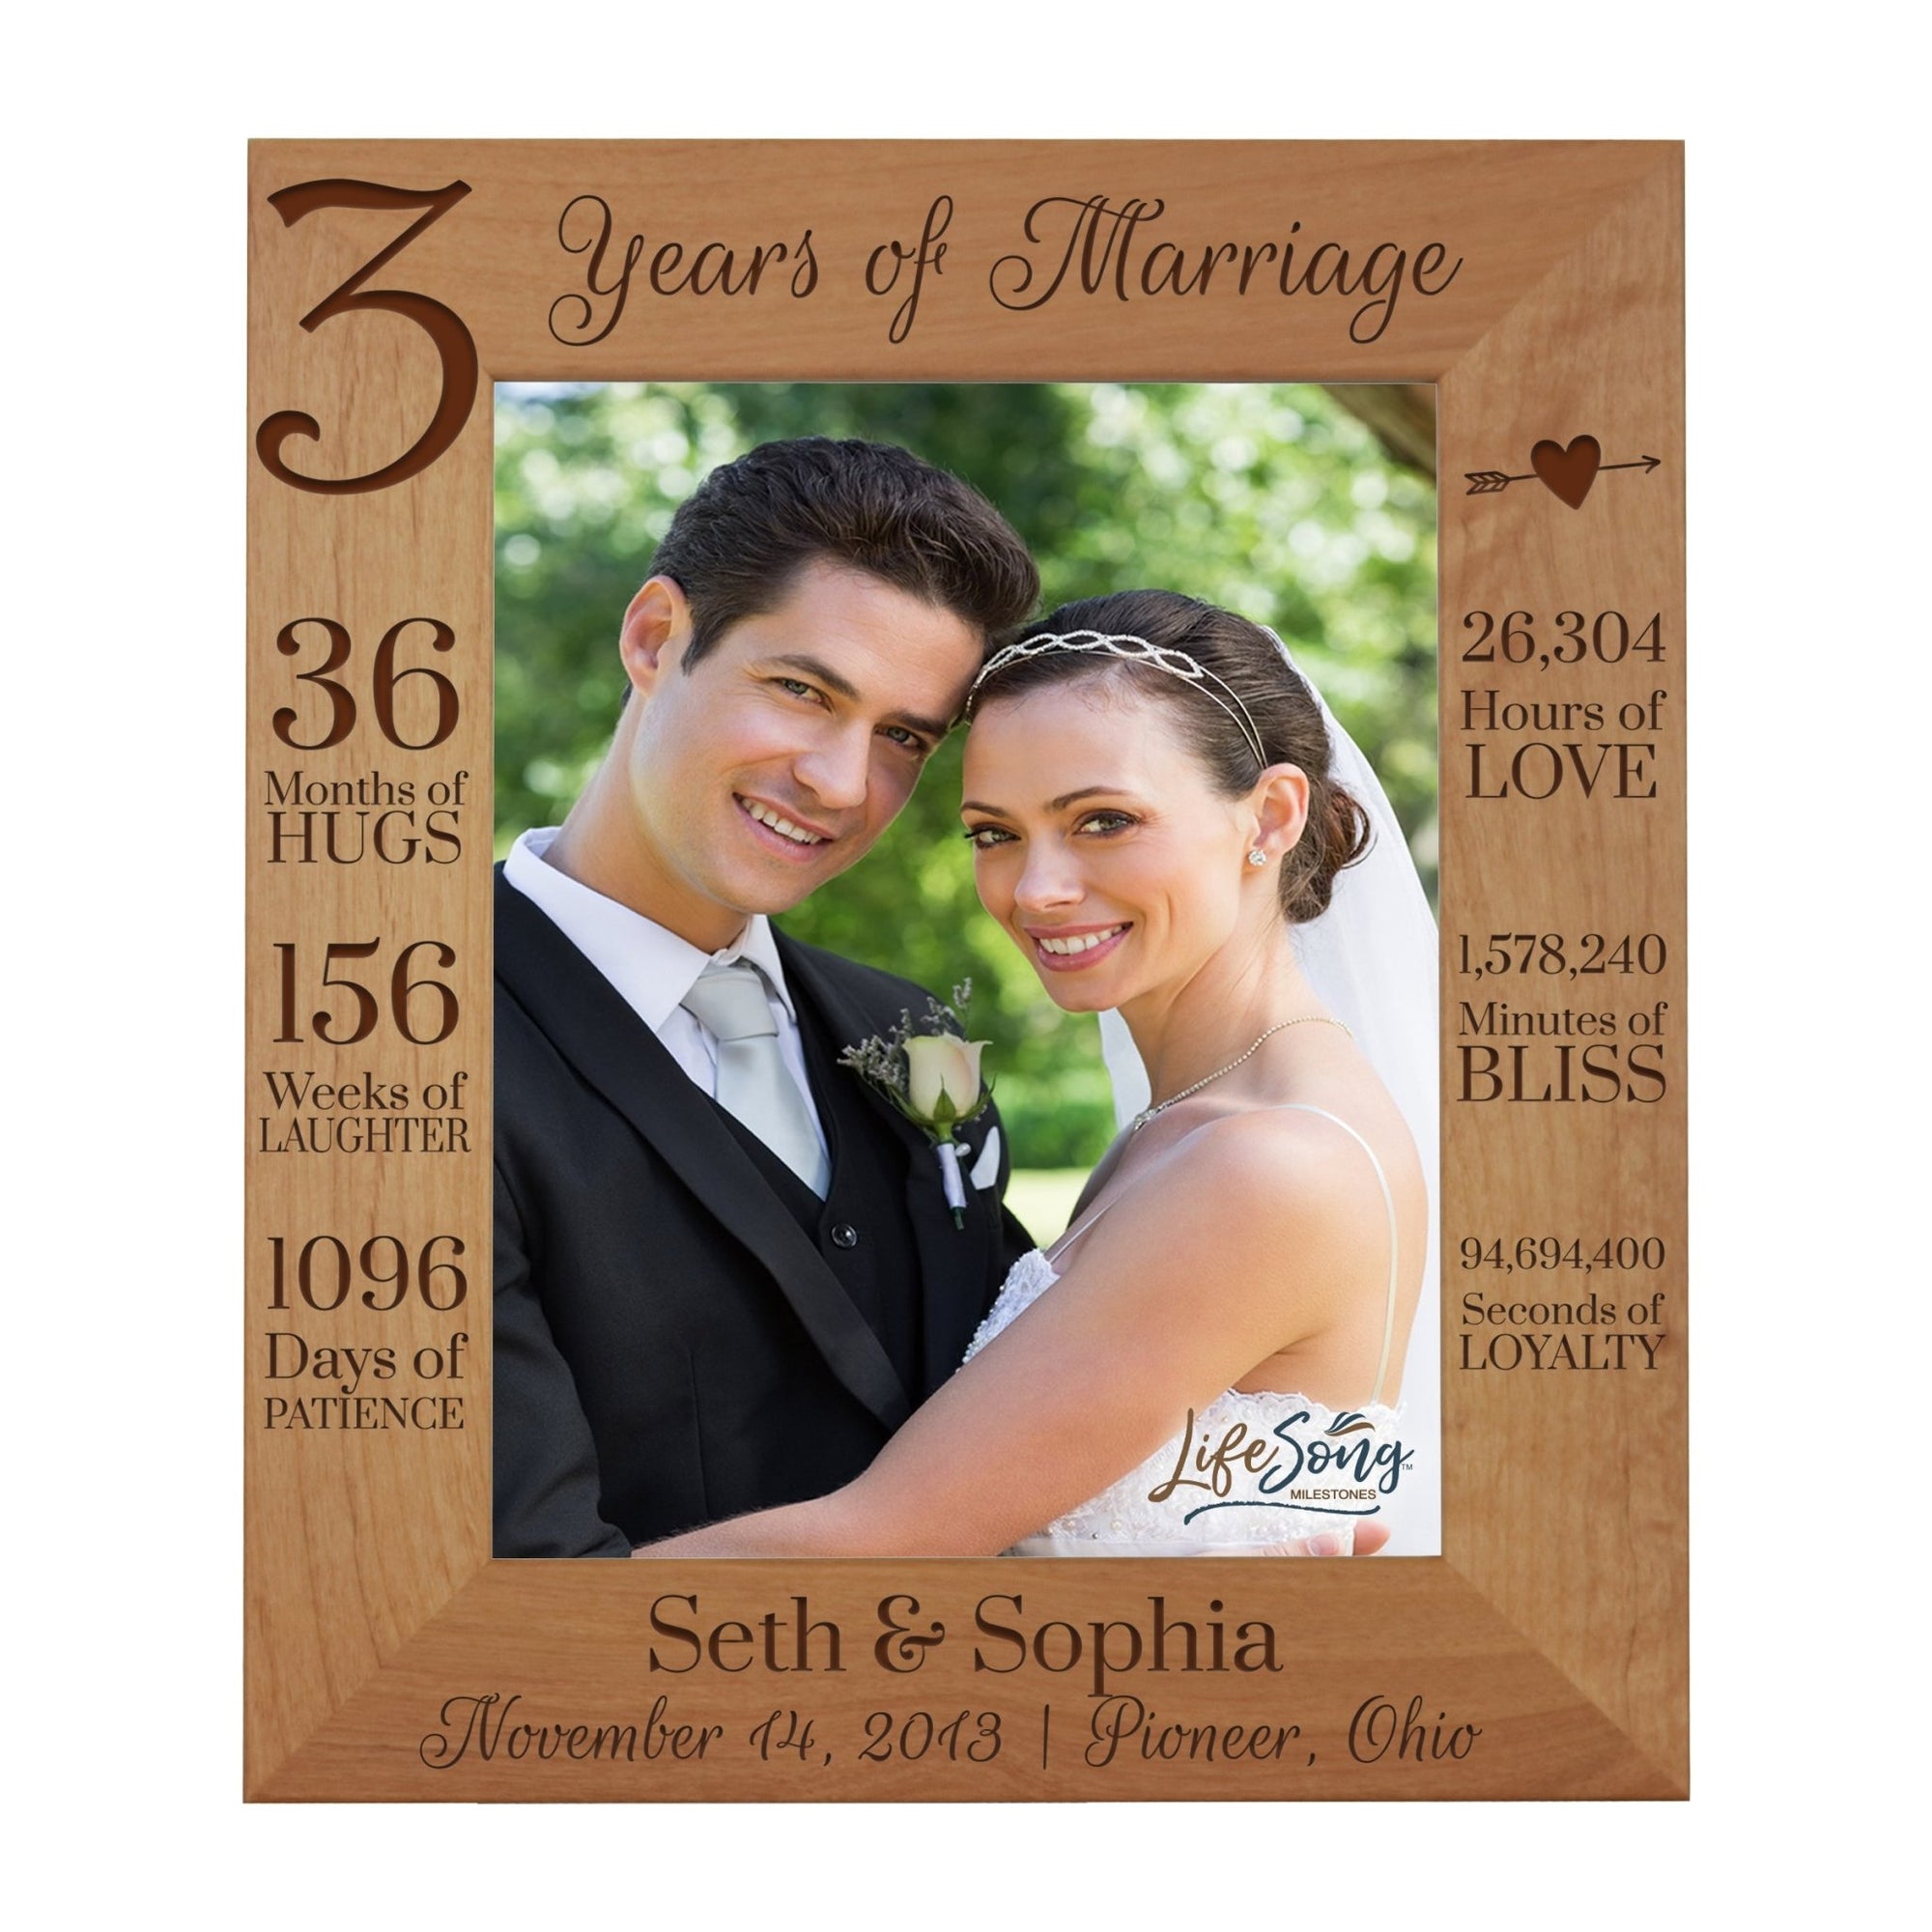 Personalized Couples 3rd Wedding Anniversary Photo Frame Home Decor Gift Ideas